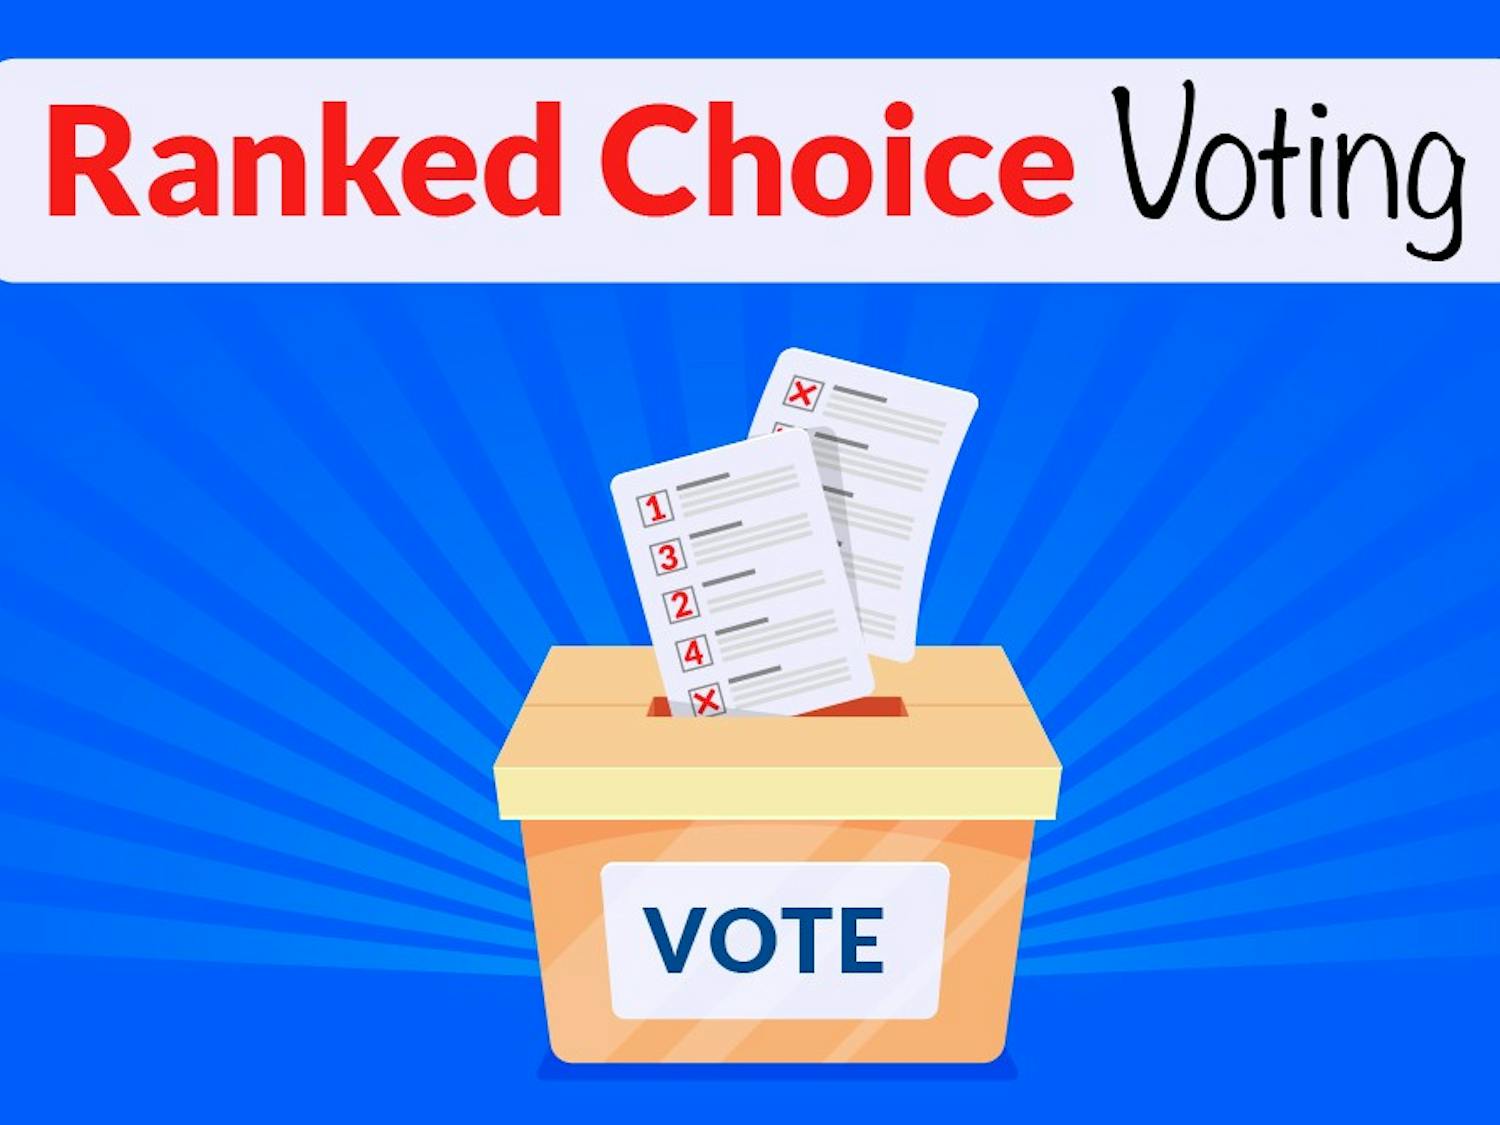 Ranked choice voting